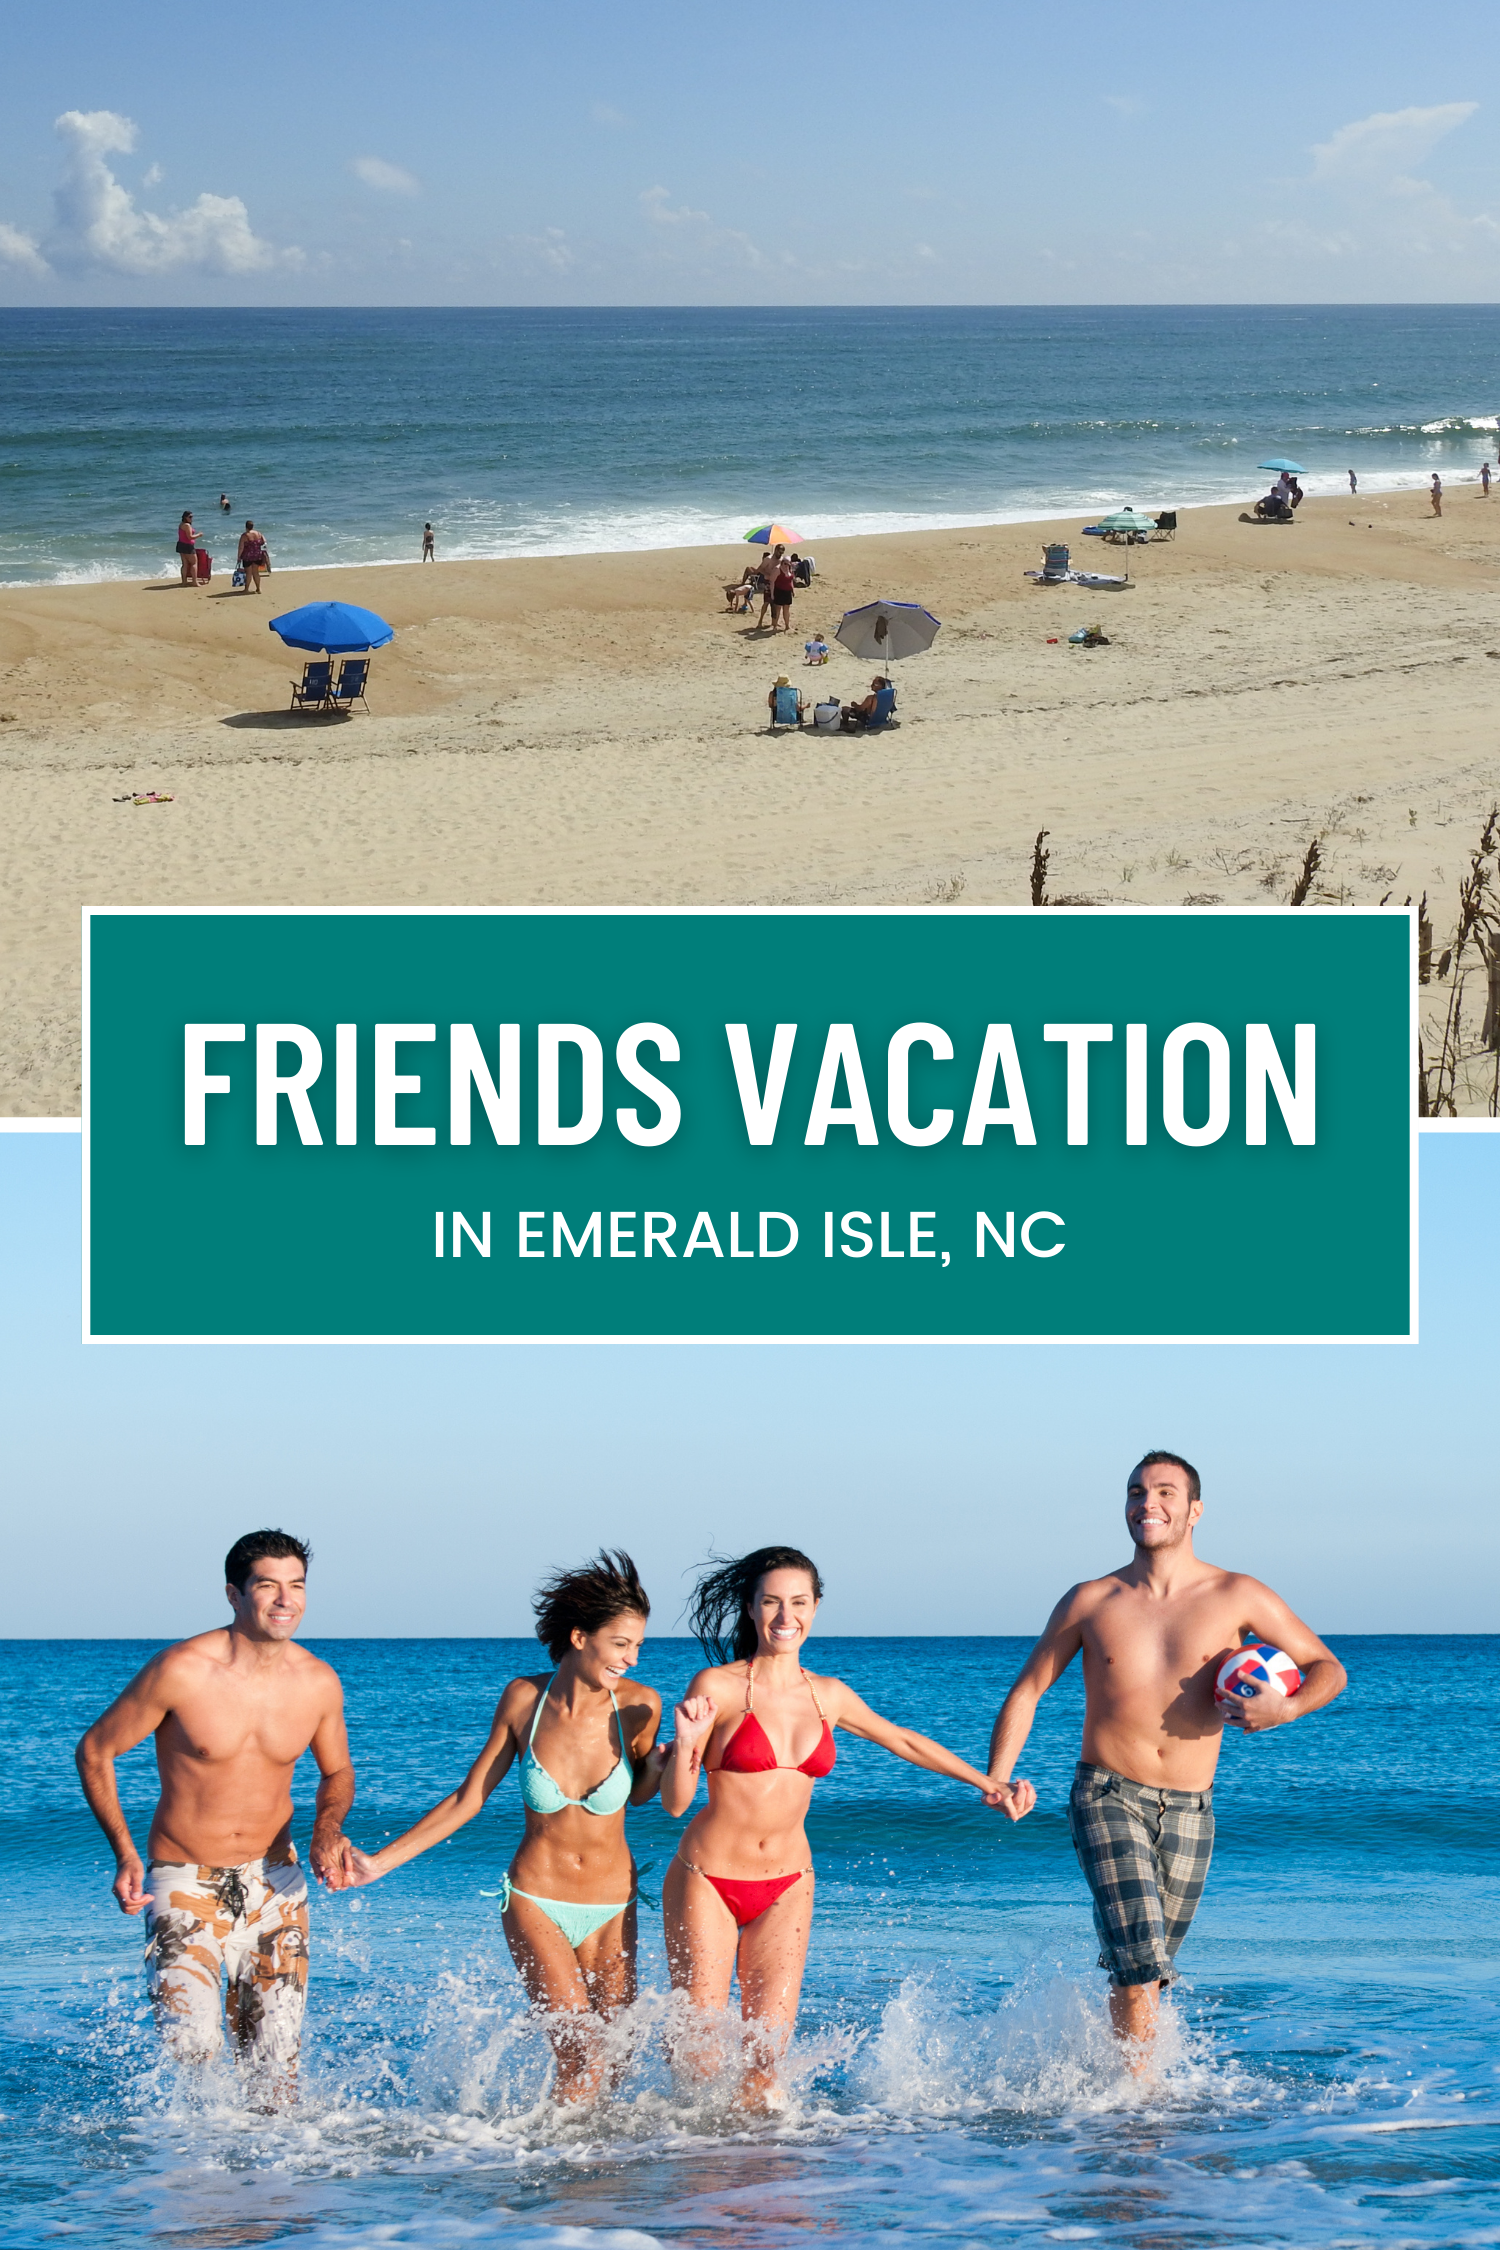 Plan Your Friends Vacation in Emerald Isle, NC